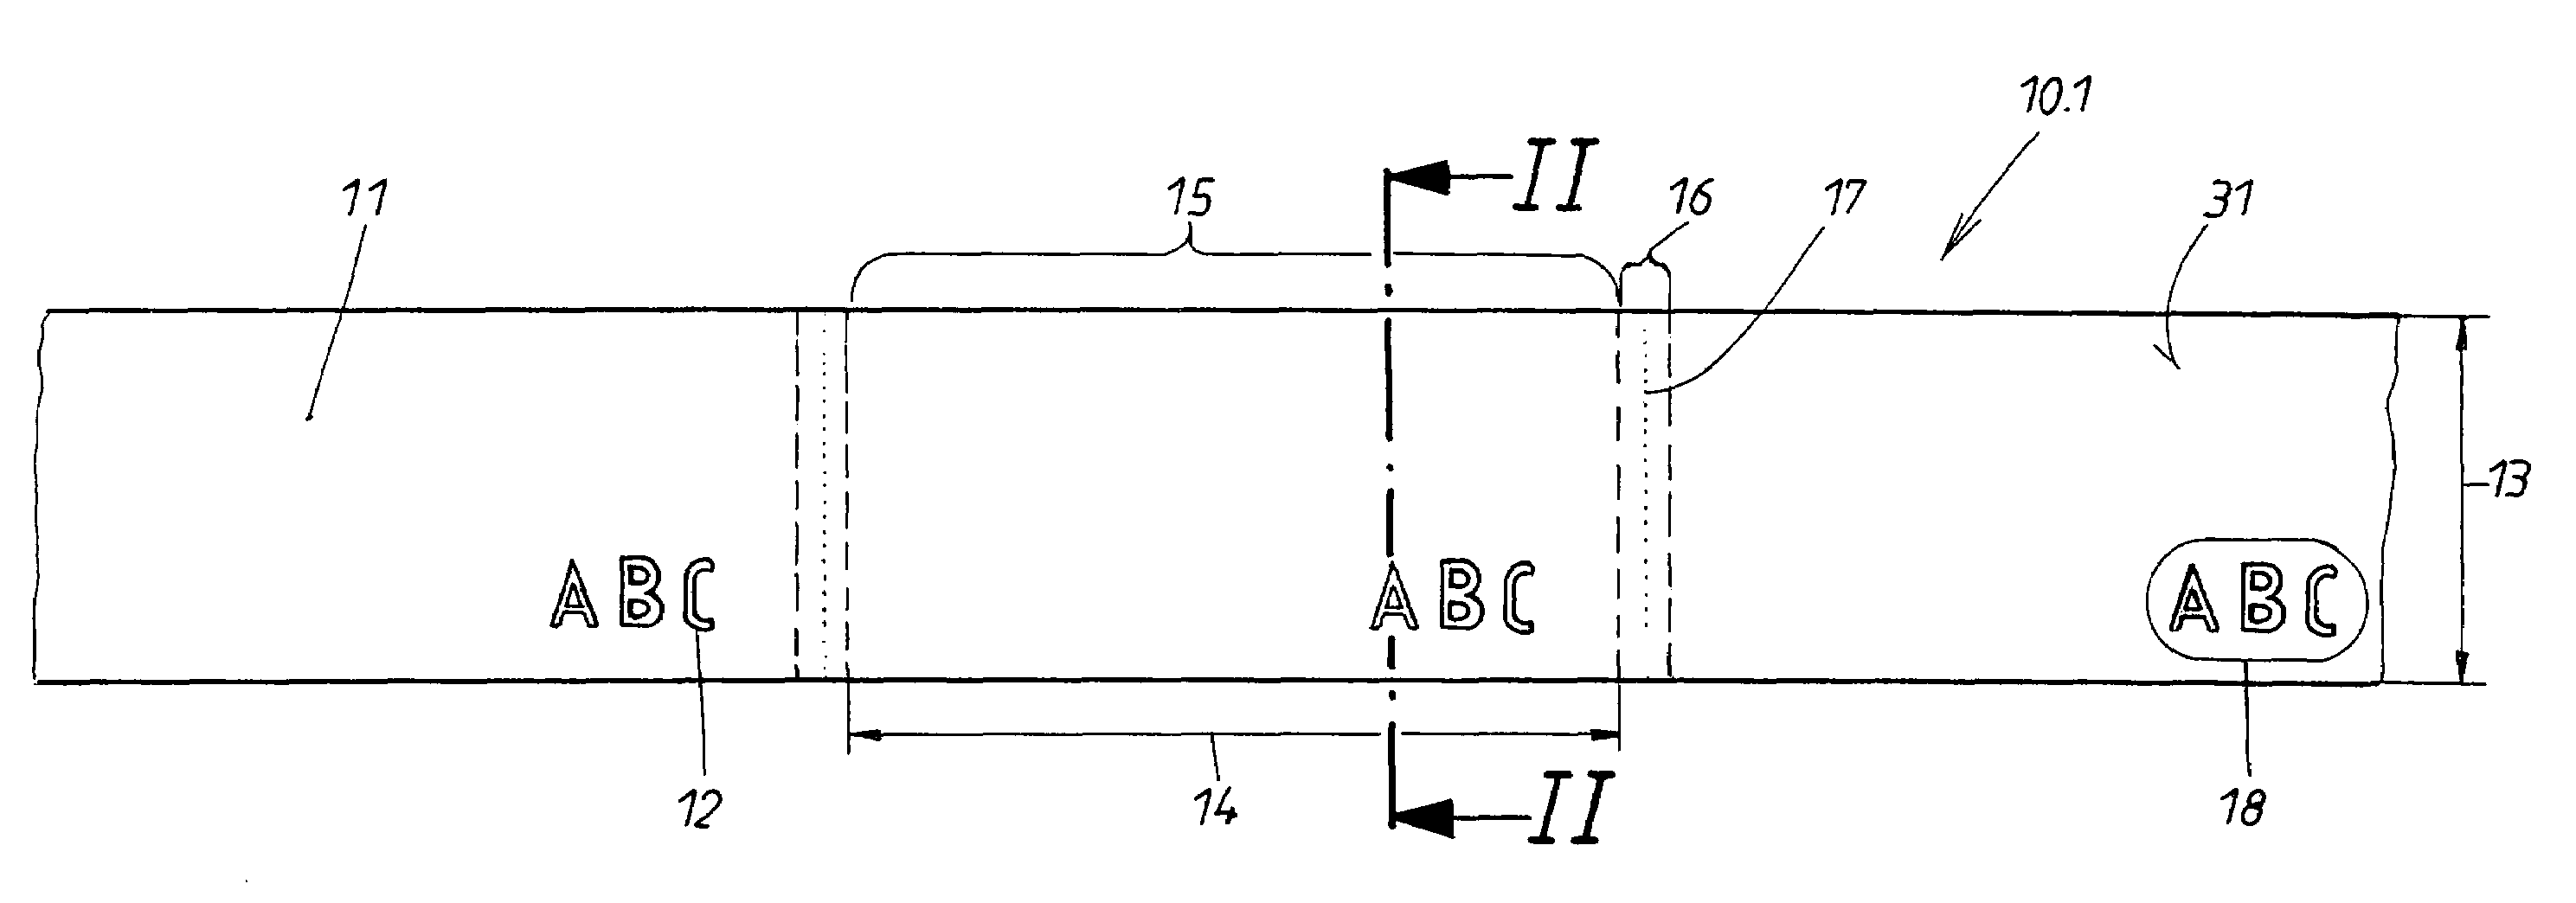 Method of manufacturing a printed textile ribbon